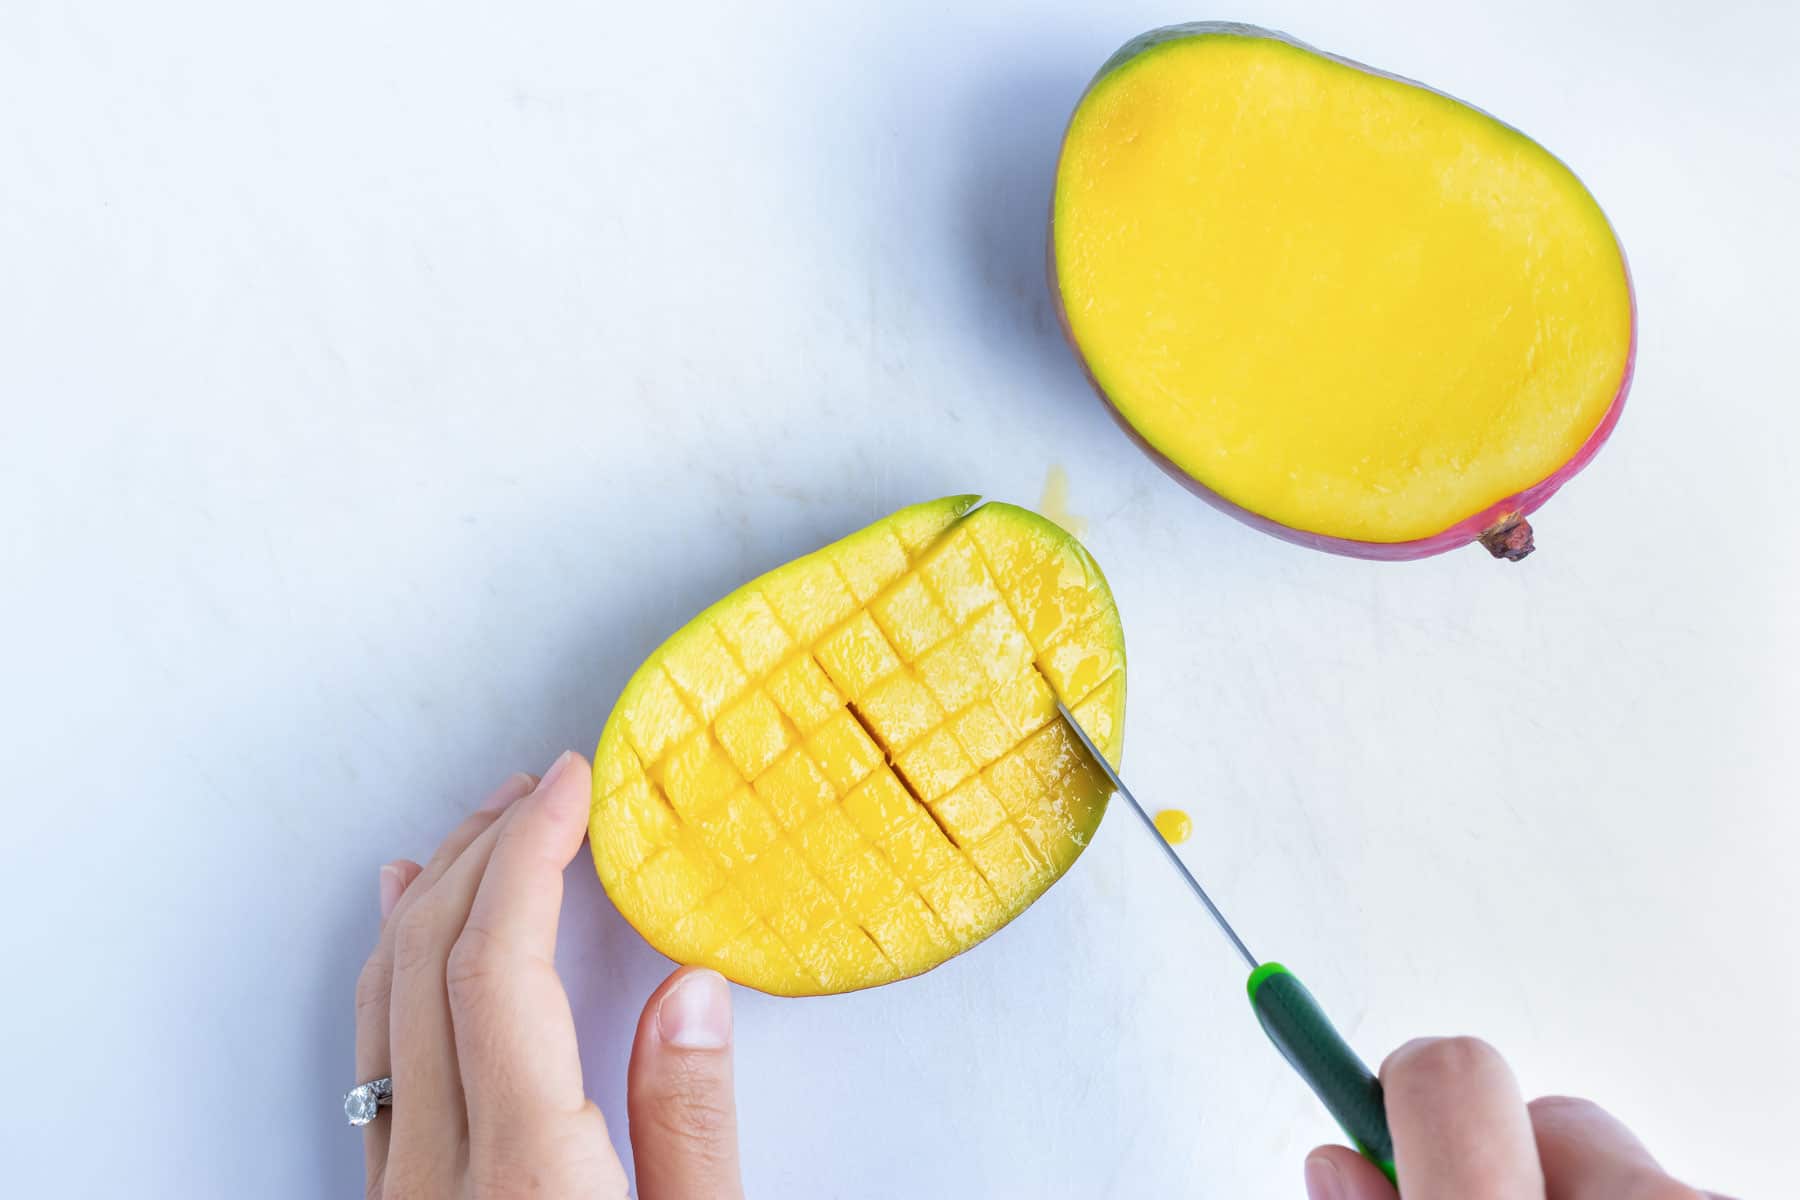 Making horizontal cuts into a mango flesh with a paring knife to dice it.